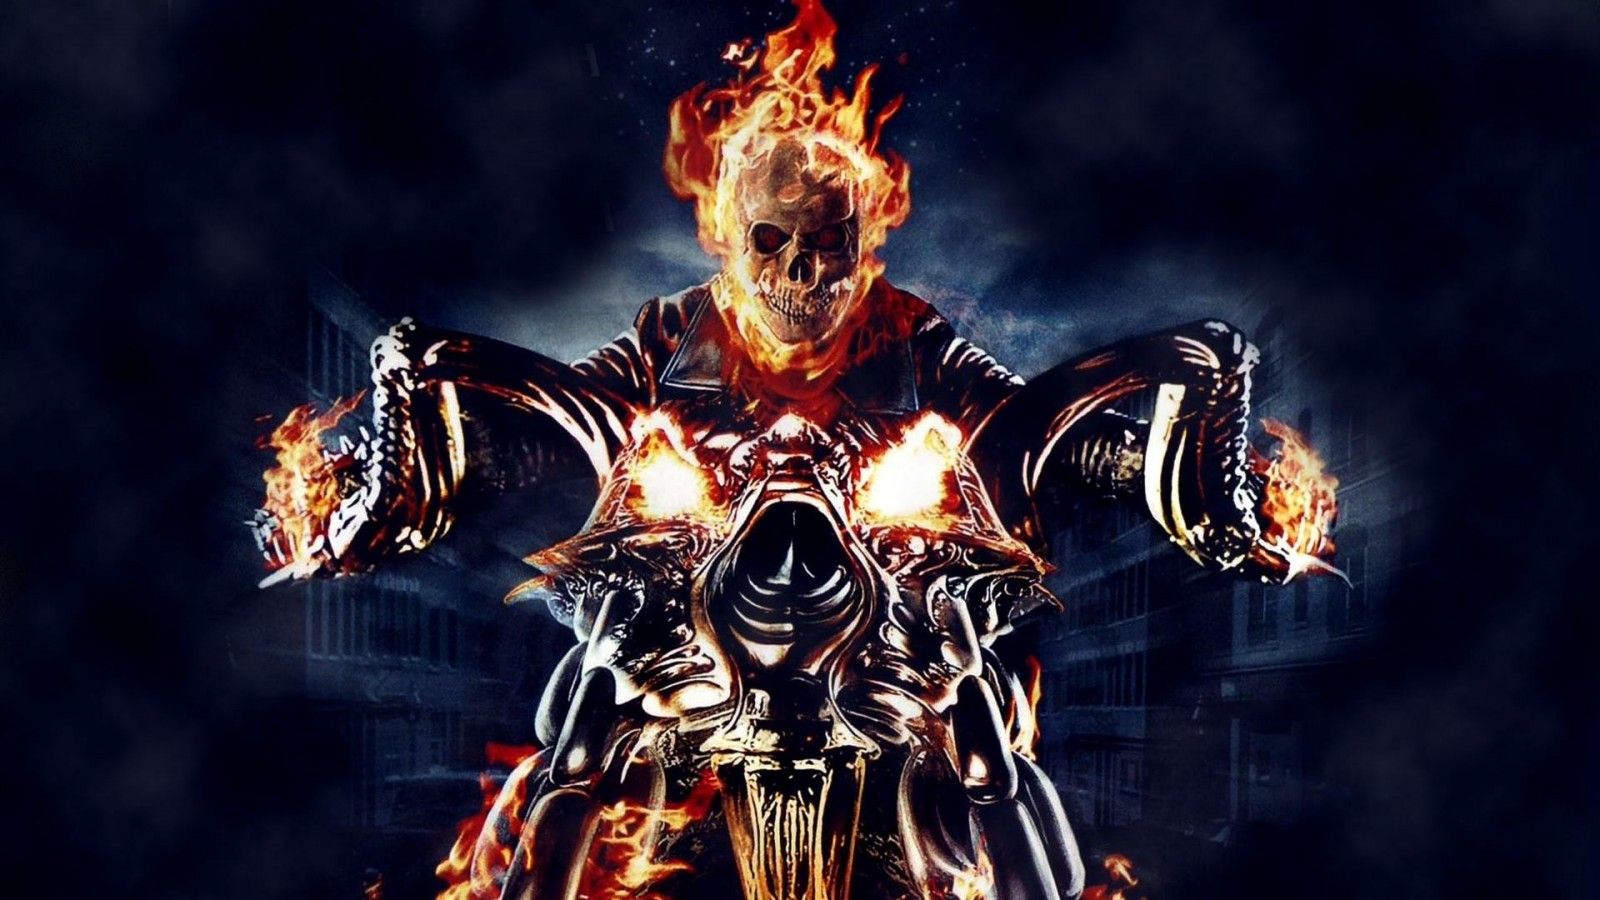 Wallpaper, 1920x1080 px, comics, fire, Ghost Rider, graphic novels, motorcycle, skull 1920x1080